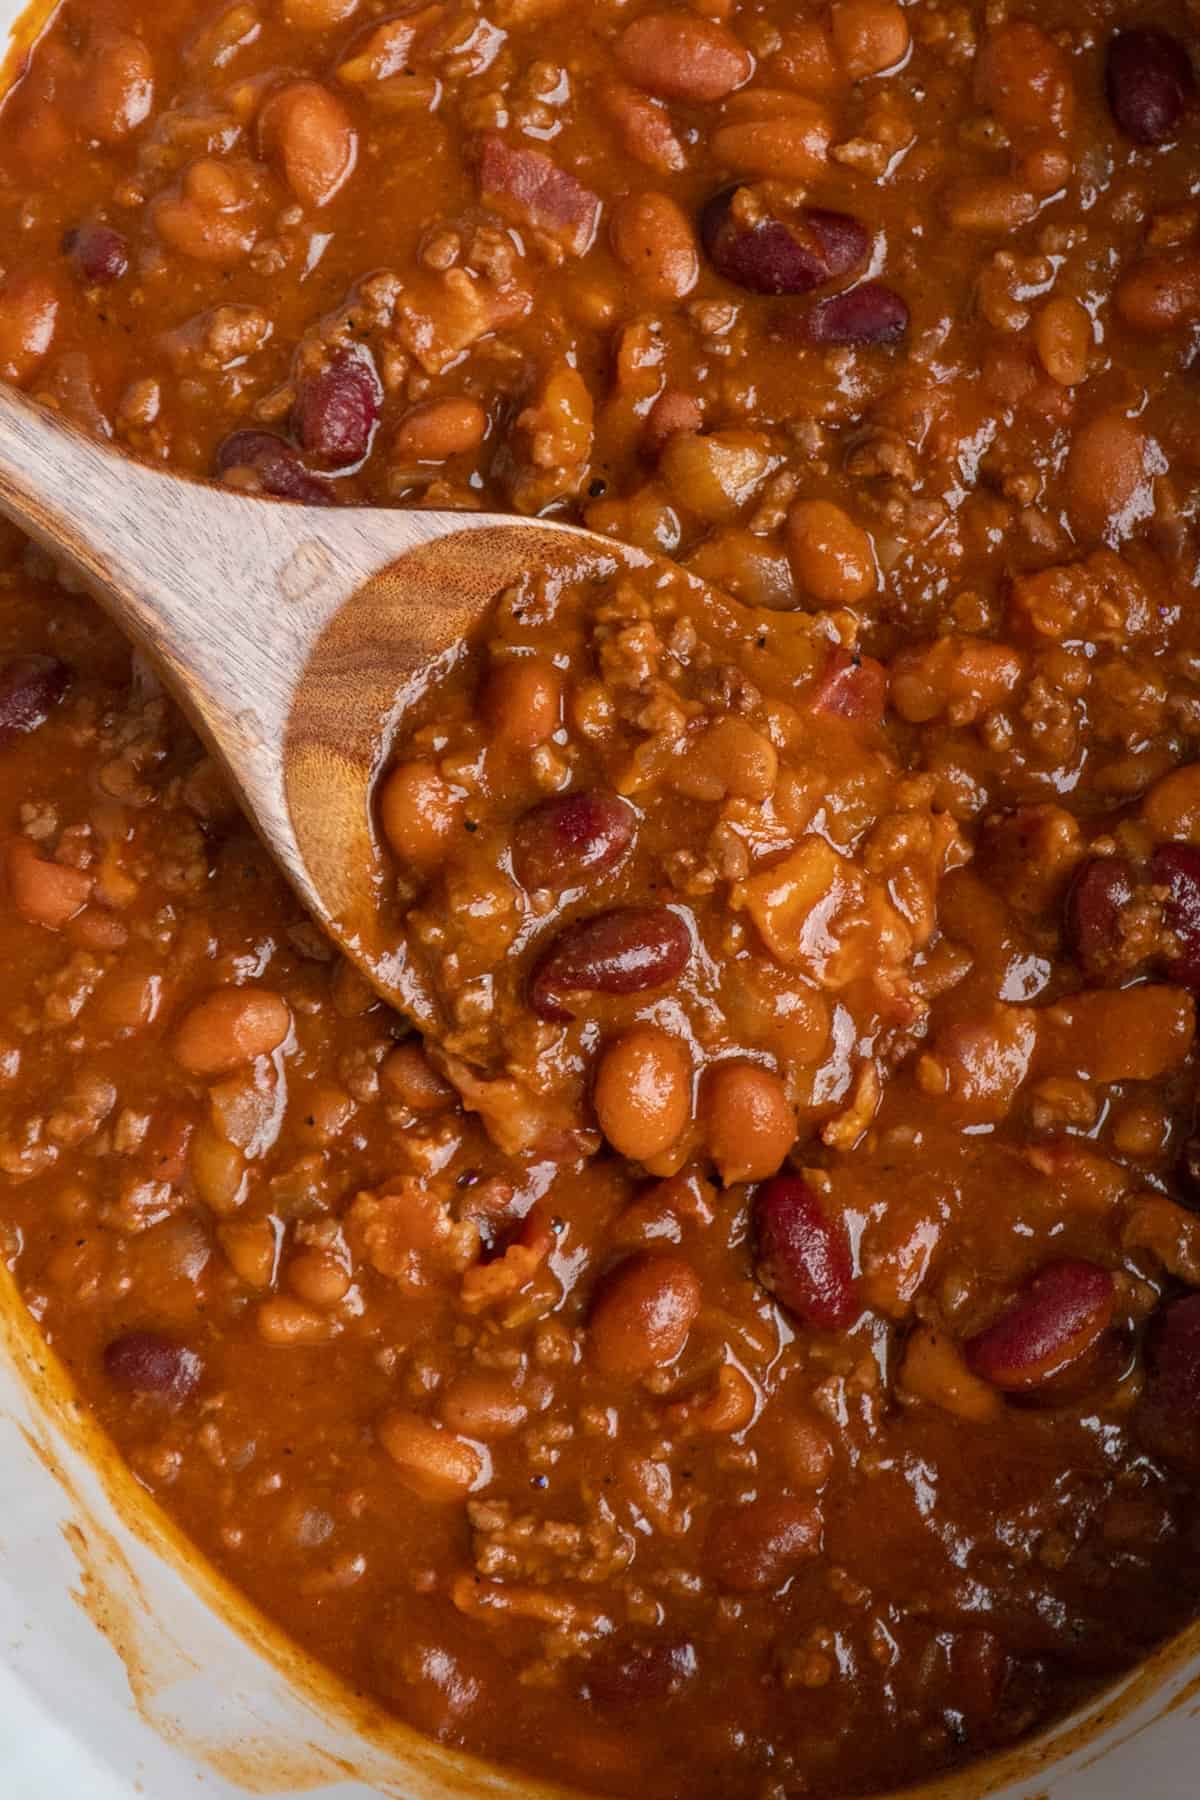 Cowboy beans in a white slow cooker with a wooden spoon.